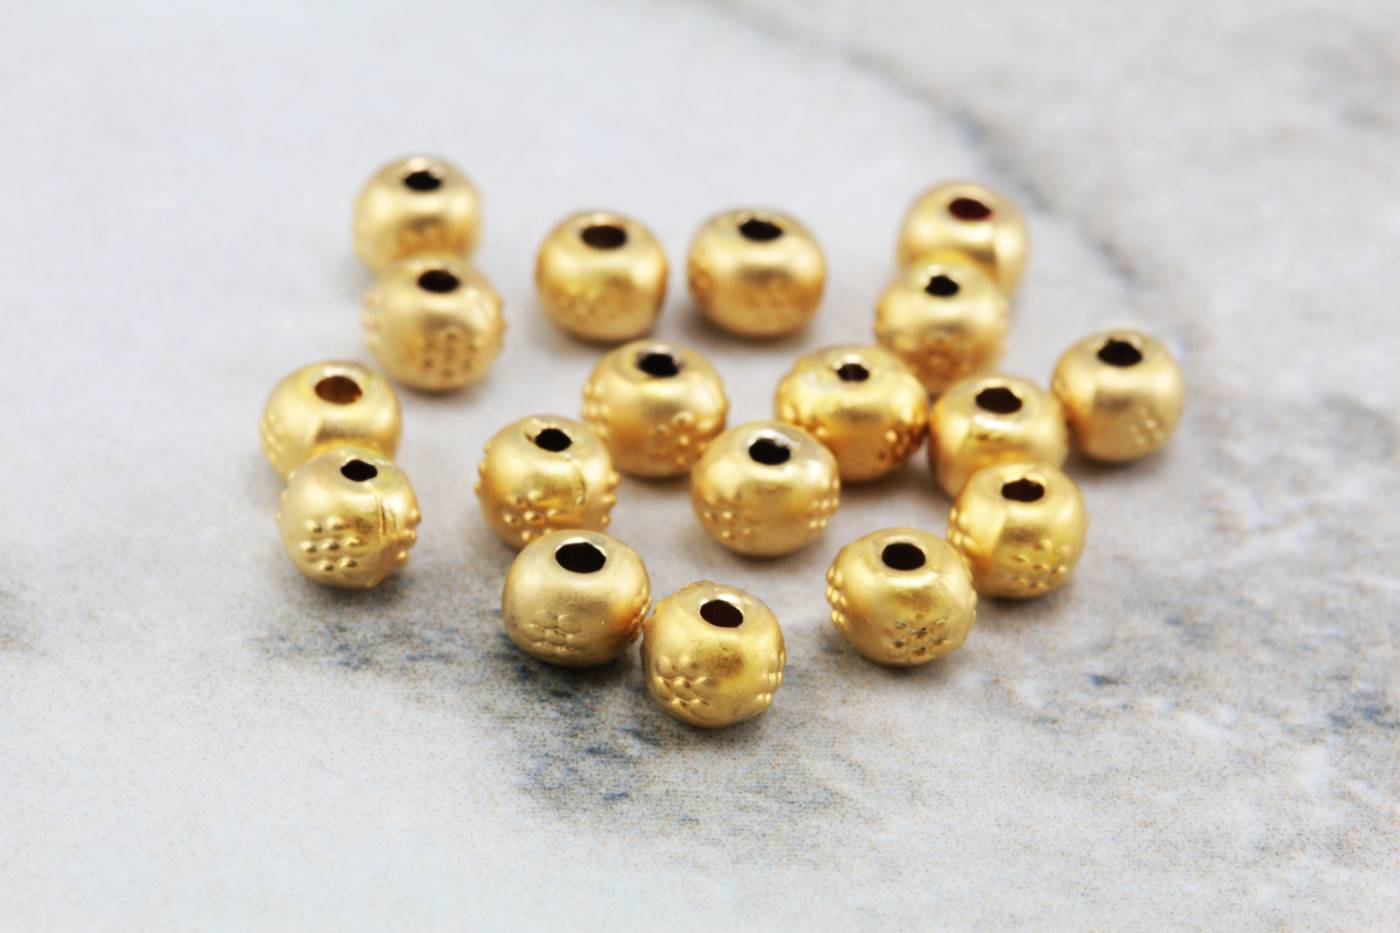 gold-tiny-round-5mm-spacer-bead-findings